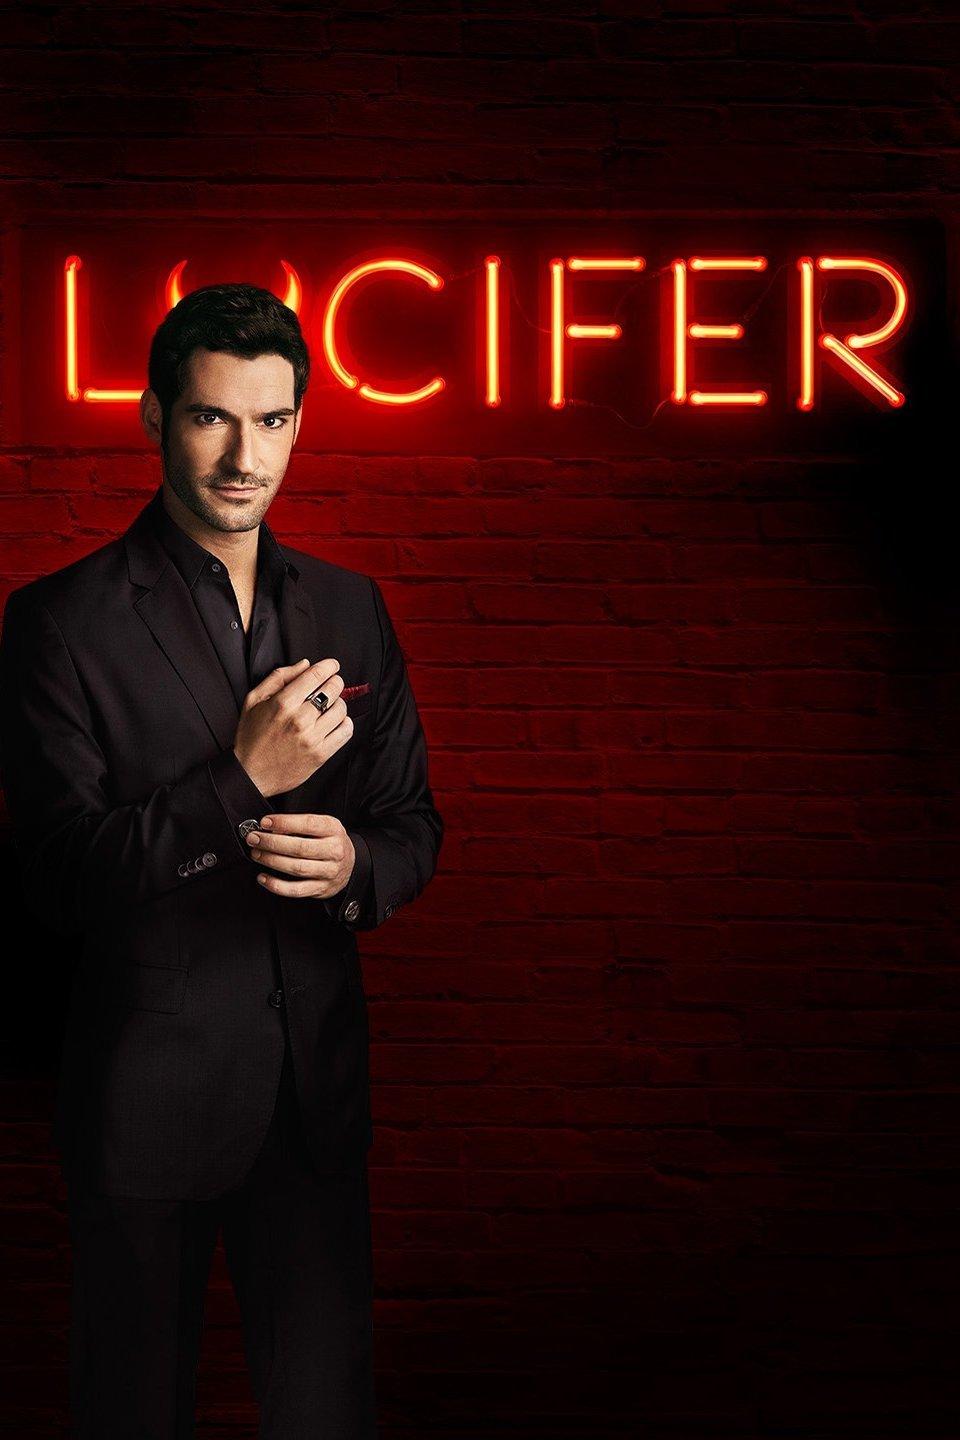 Lucifer- A Unique Twist on the Devil! 'Lucifer' Wins Hearts with Dry Humor, Suspense, and Romance.